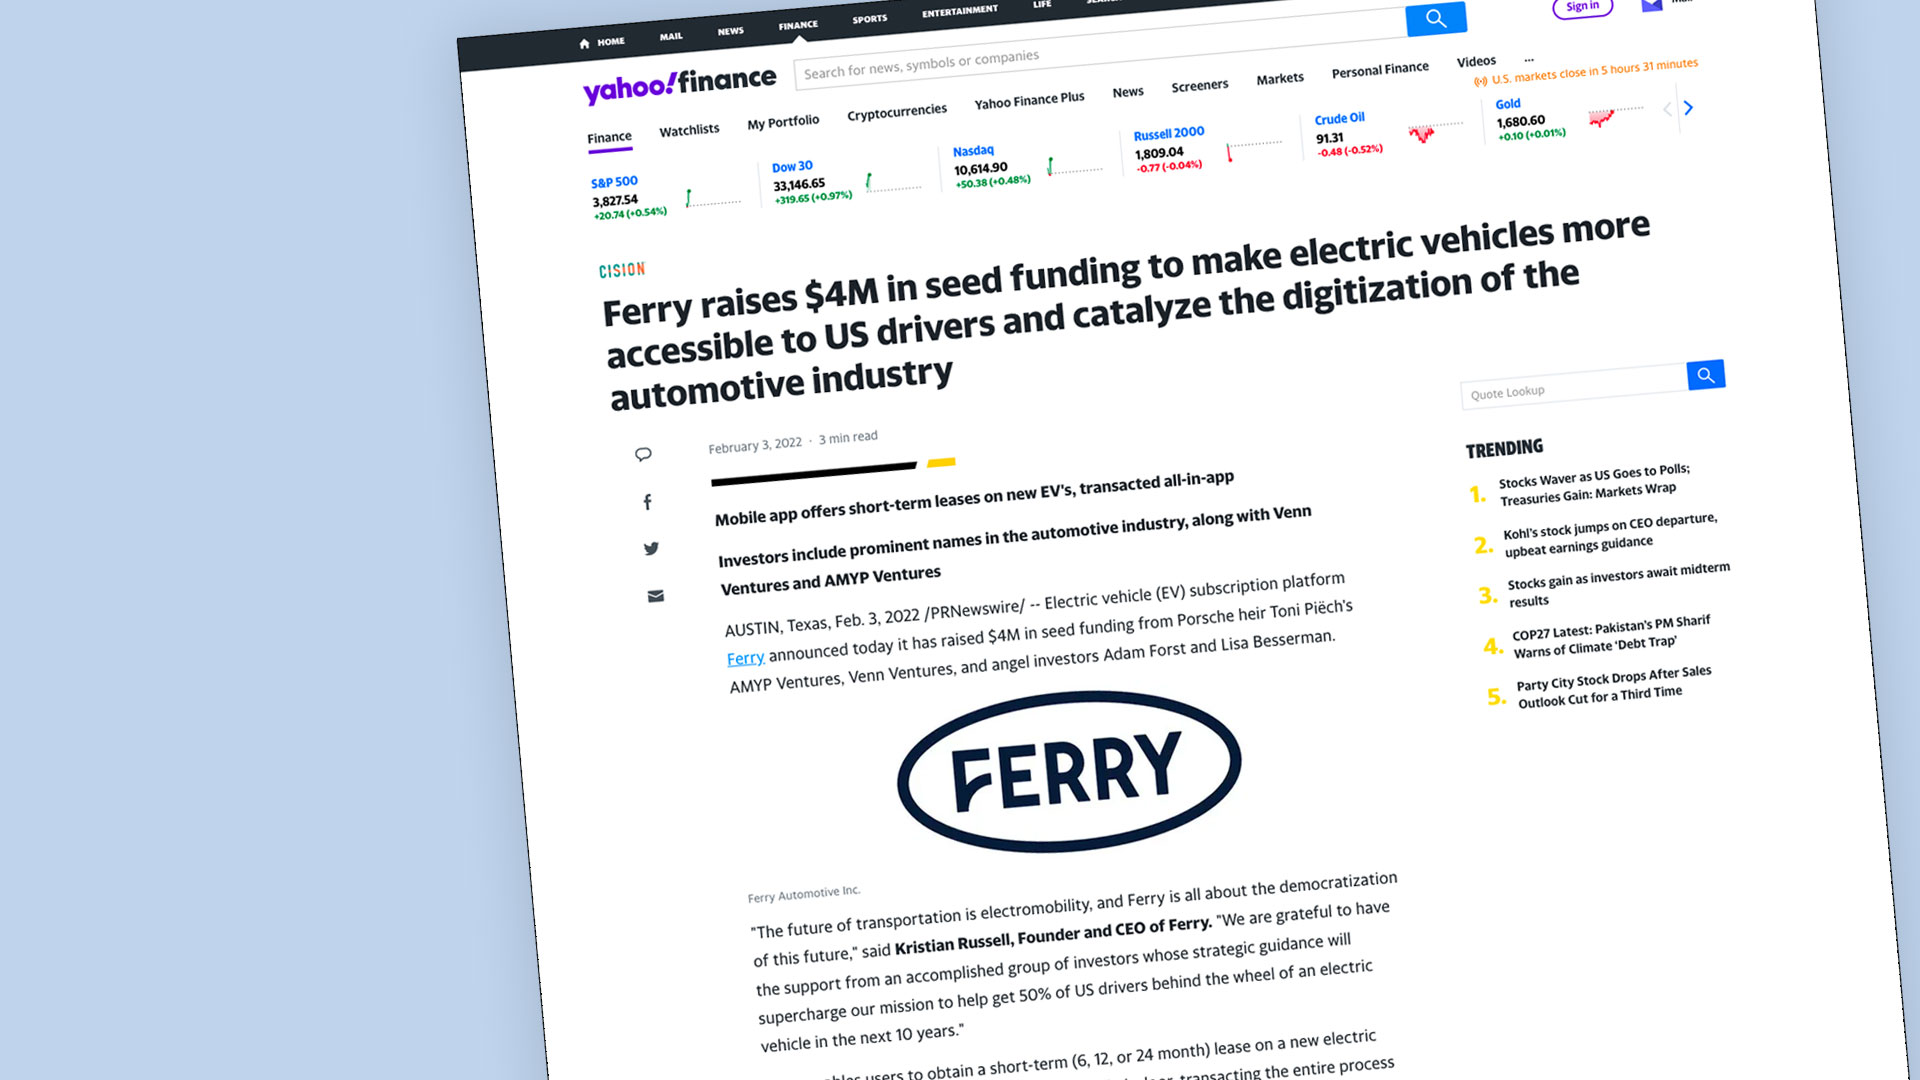 Ferry raises $4M in seed funding to make electric vehicles more accessible